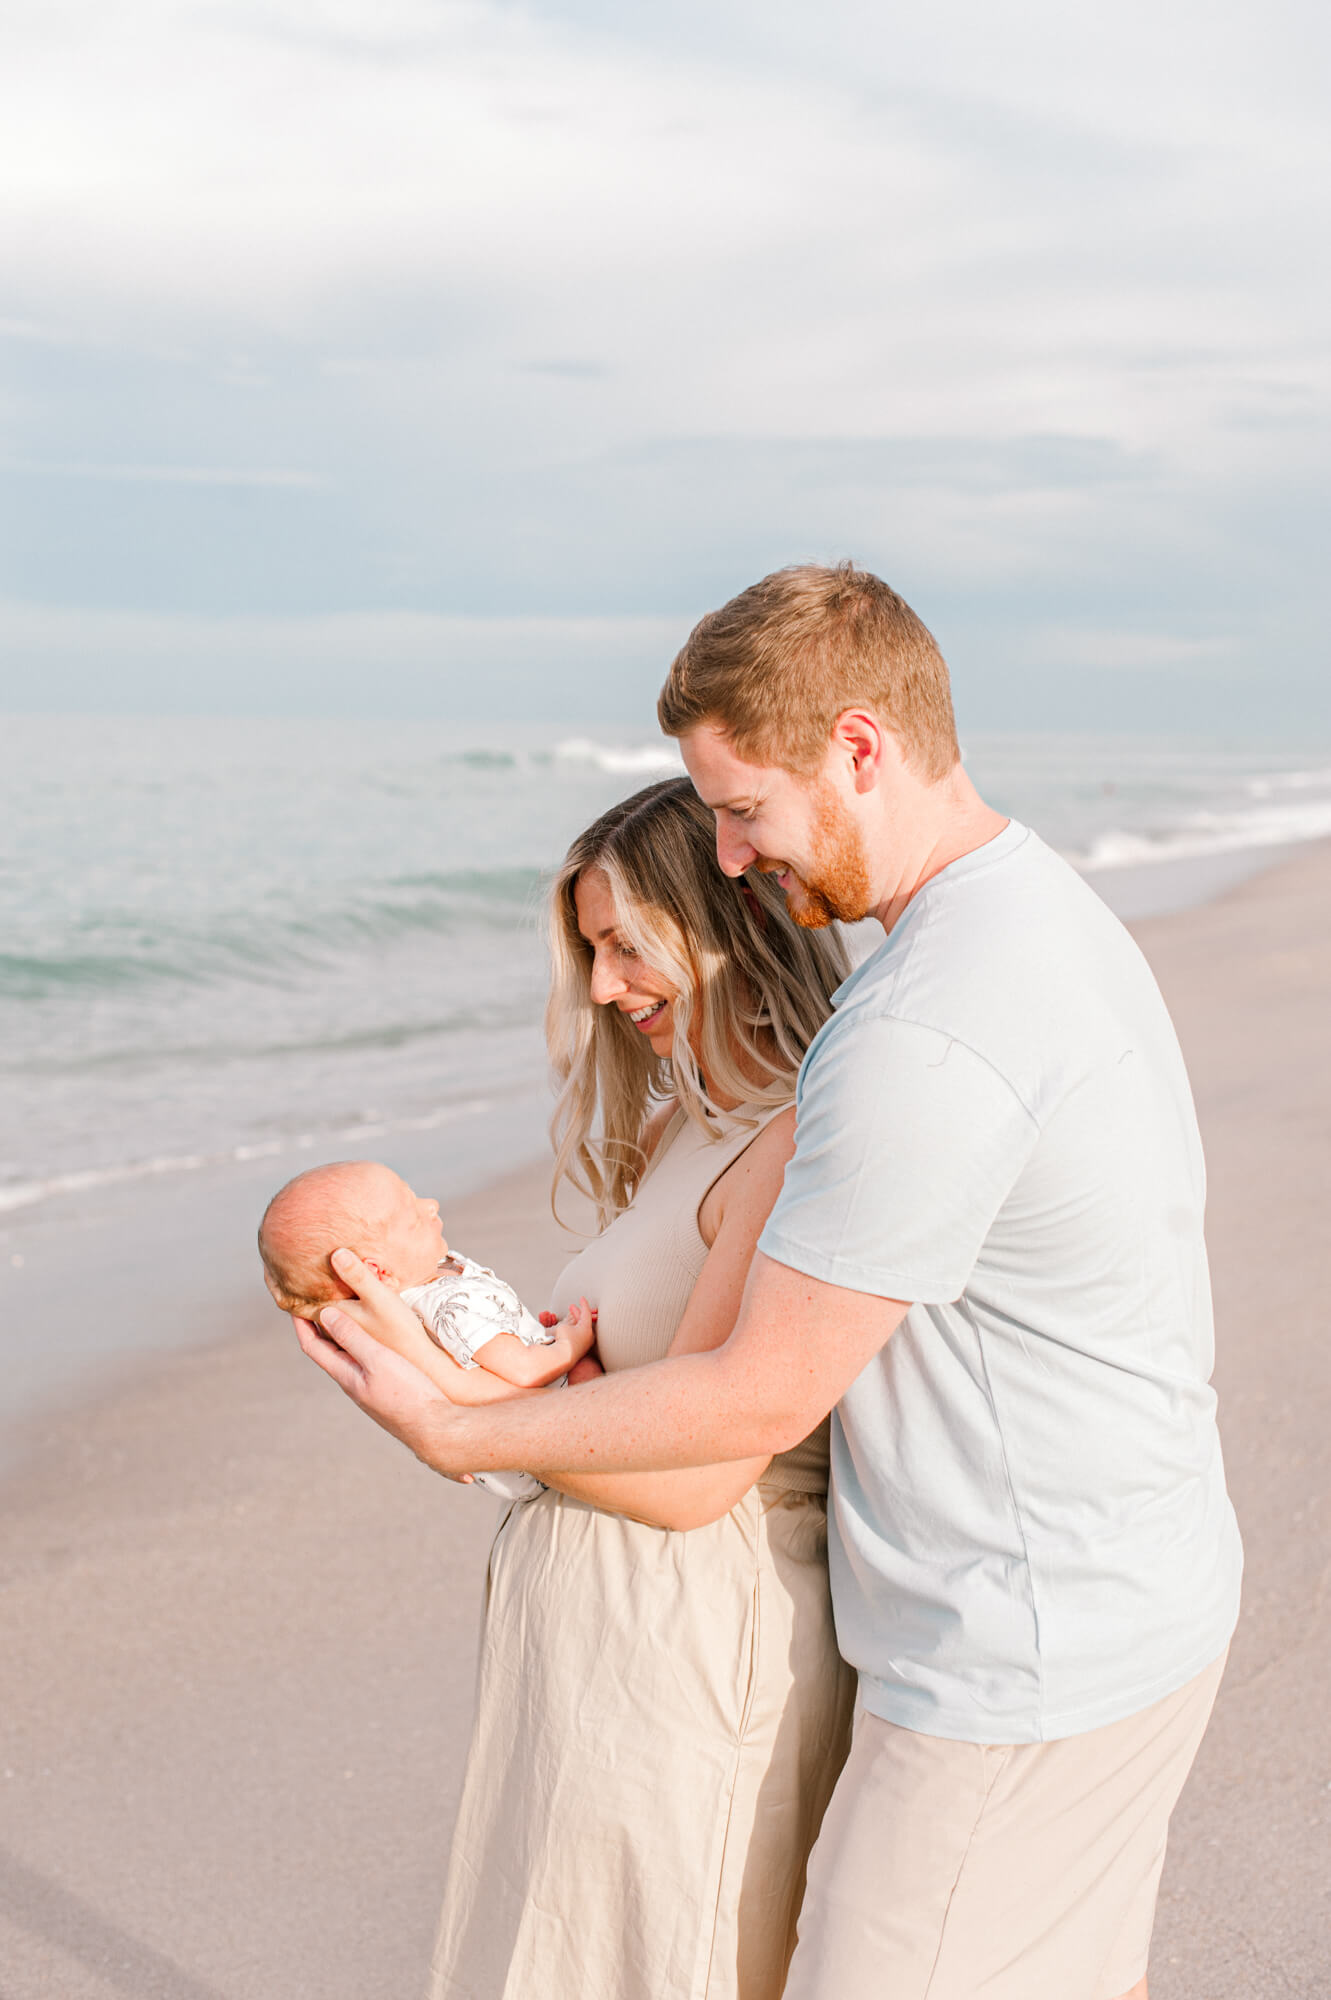 New parents stand near the waters edge while holding their sun and admiring him just a few weeks old.